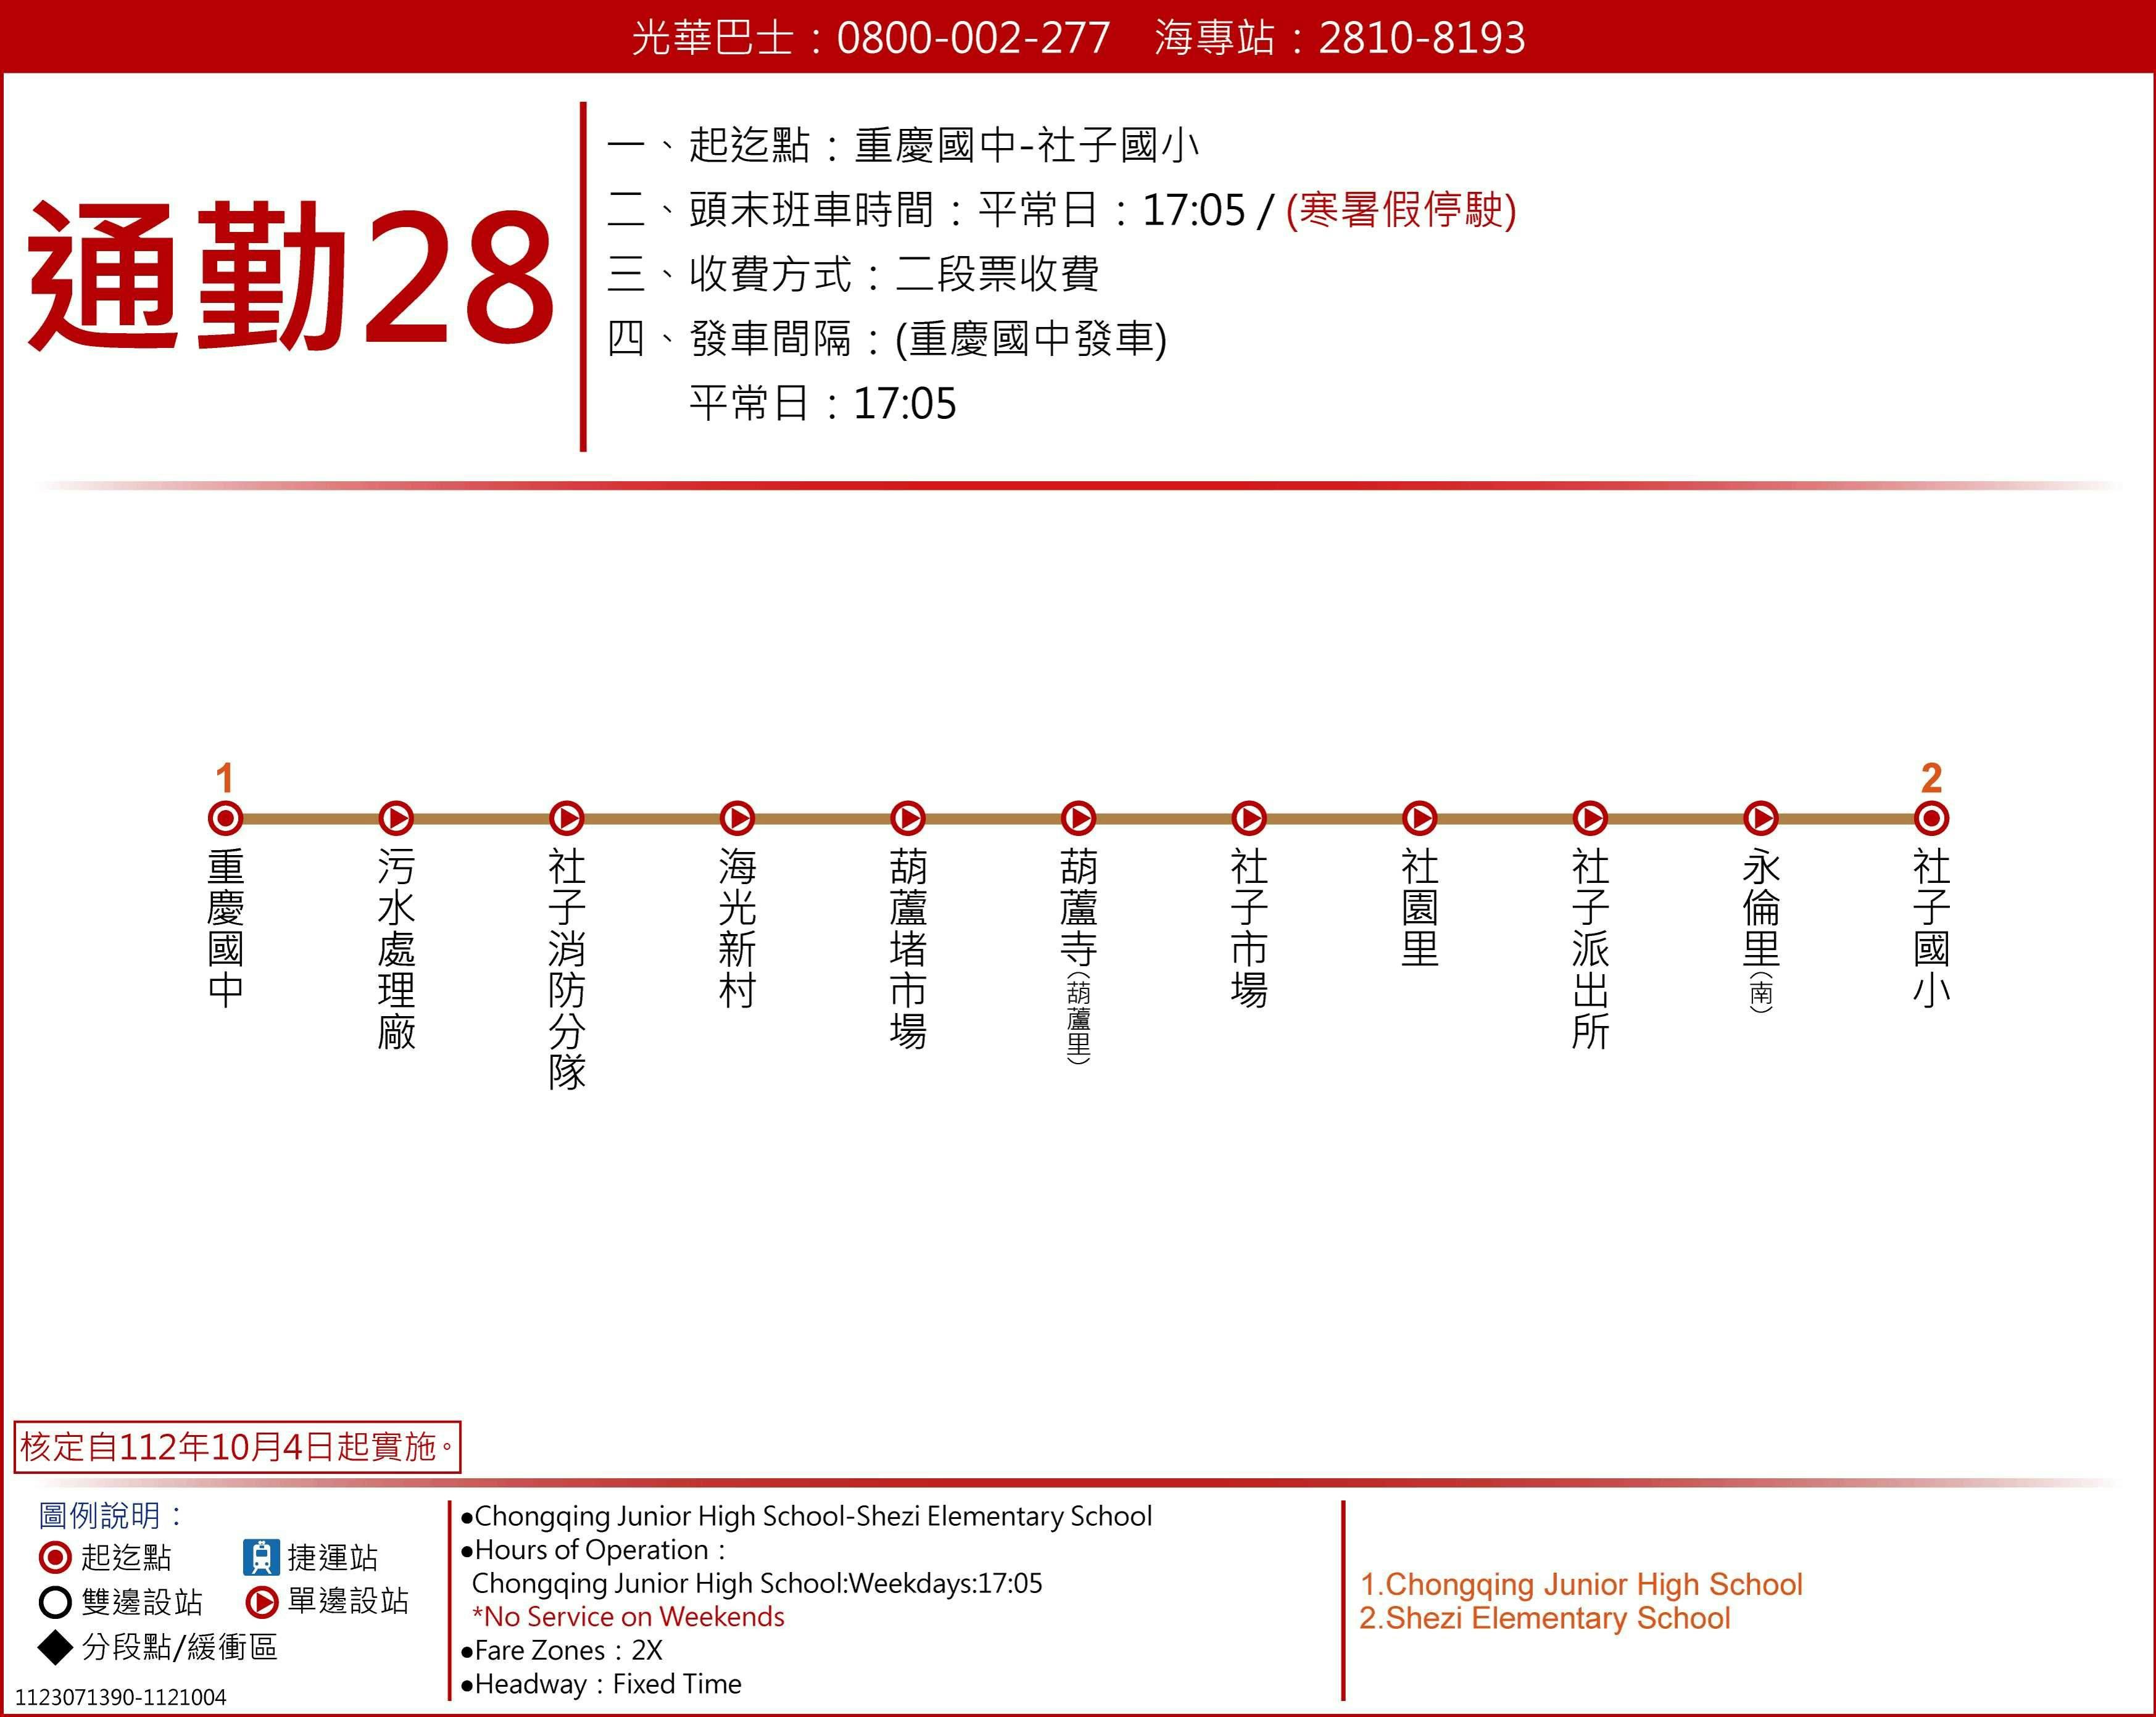 CB28Route Map-台北市 Bus